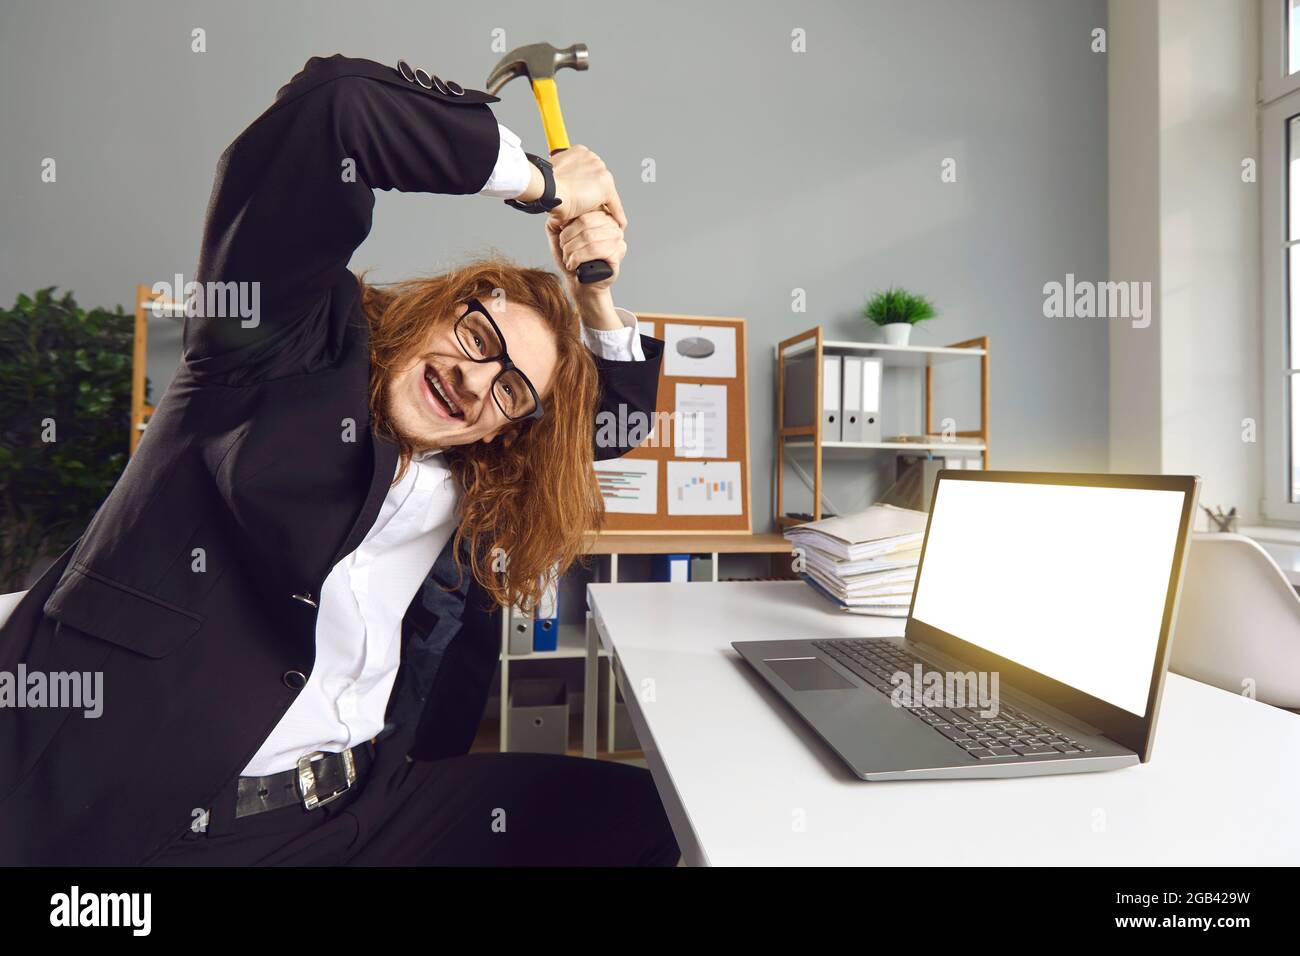 Portrait of a funny crazy office worker sitting at a desk breaking a laptop with a hammer. Stock Photo